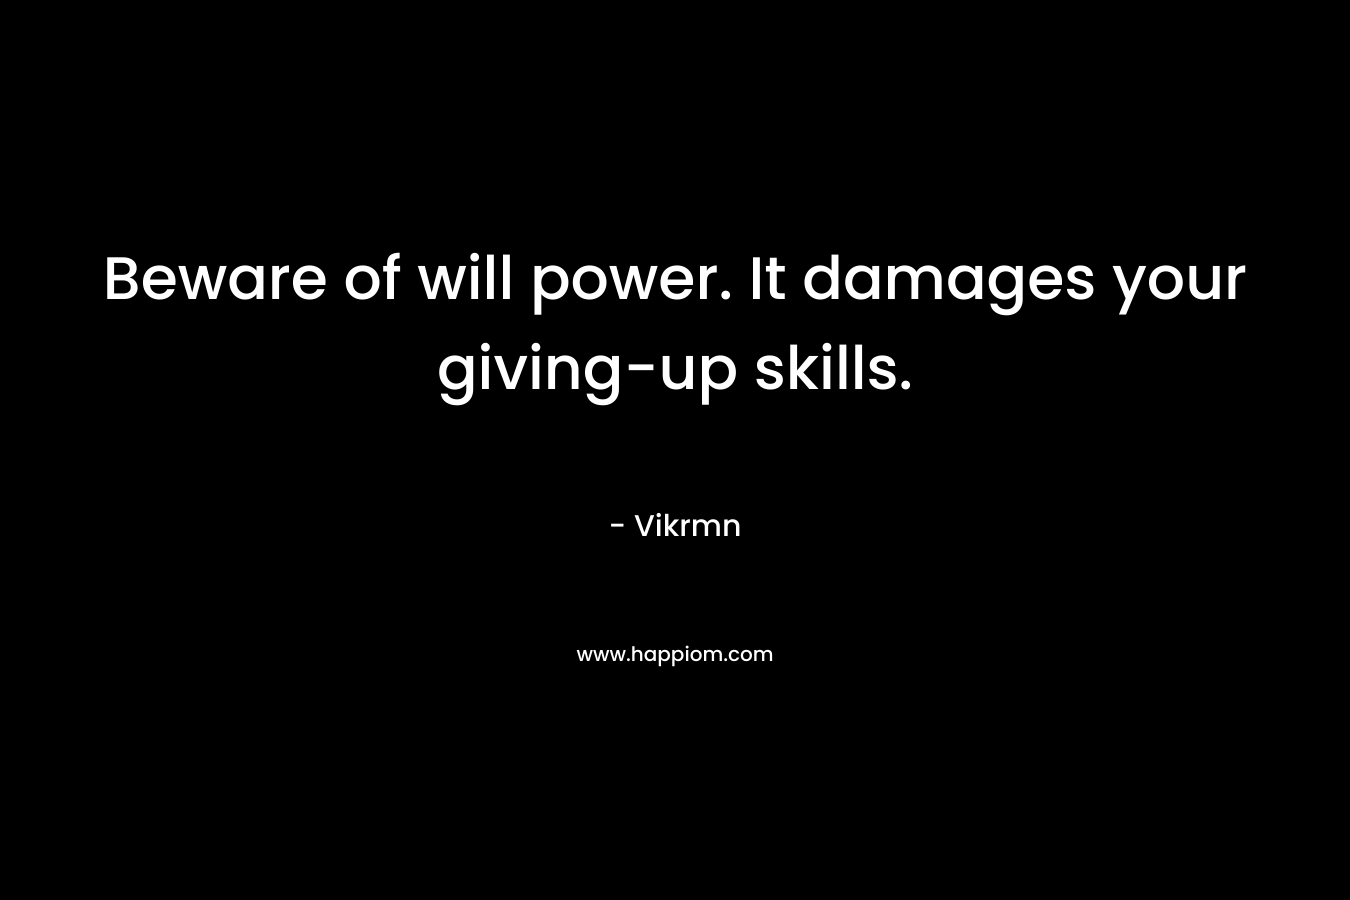 Beware of will power. It damages your giving-up skills.